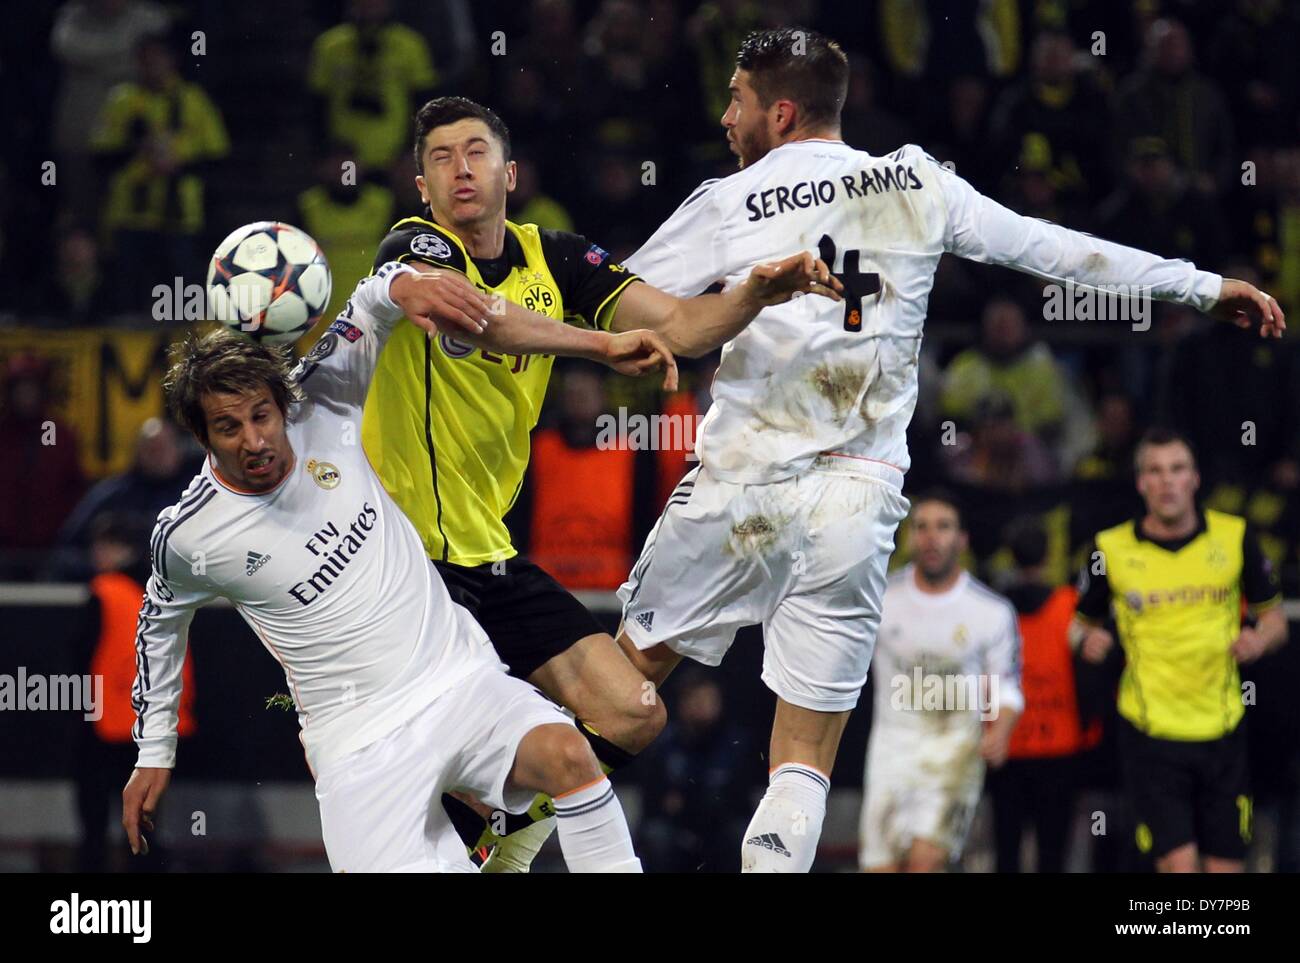 Dortmund, Germany. 08th Apr, 2014. Dortmund's Robert Lewandowski (C) in action against Madrid's Fabio Coentrao (L) and Sergio Ramos (R) during the UEFA Champions League quarter-final second leg soccer match between Borussia Dortmund and Real Madrid at the BVB stadium in Dortmund, Germany, 08 April 2014. Real lost 2-0 in Dortmund, on a first-half brace from Marco Reus, but scraped through on a 3-2 aggregate thanks to winning the first leg 3-0. Photo: Friso Gentsch/dpa/Alamy Live News Stock Photo